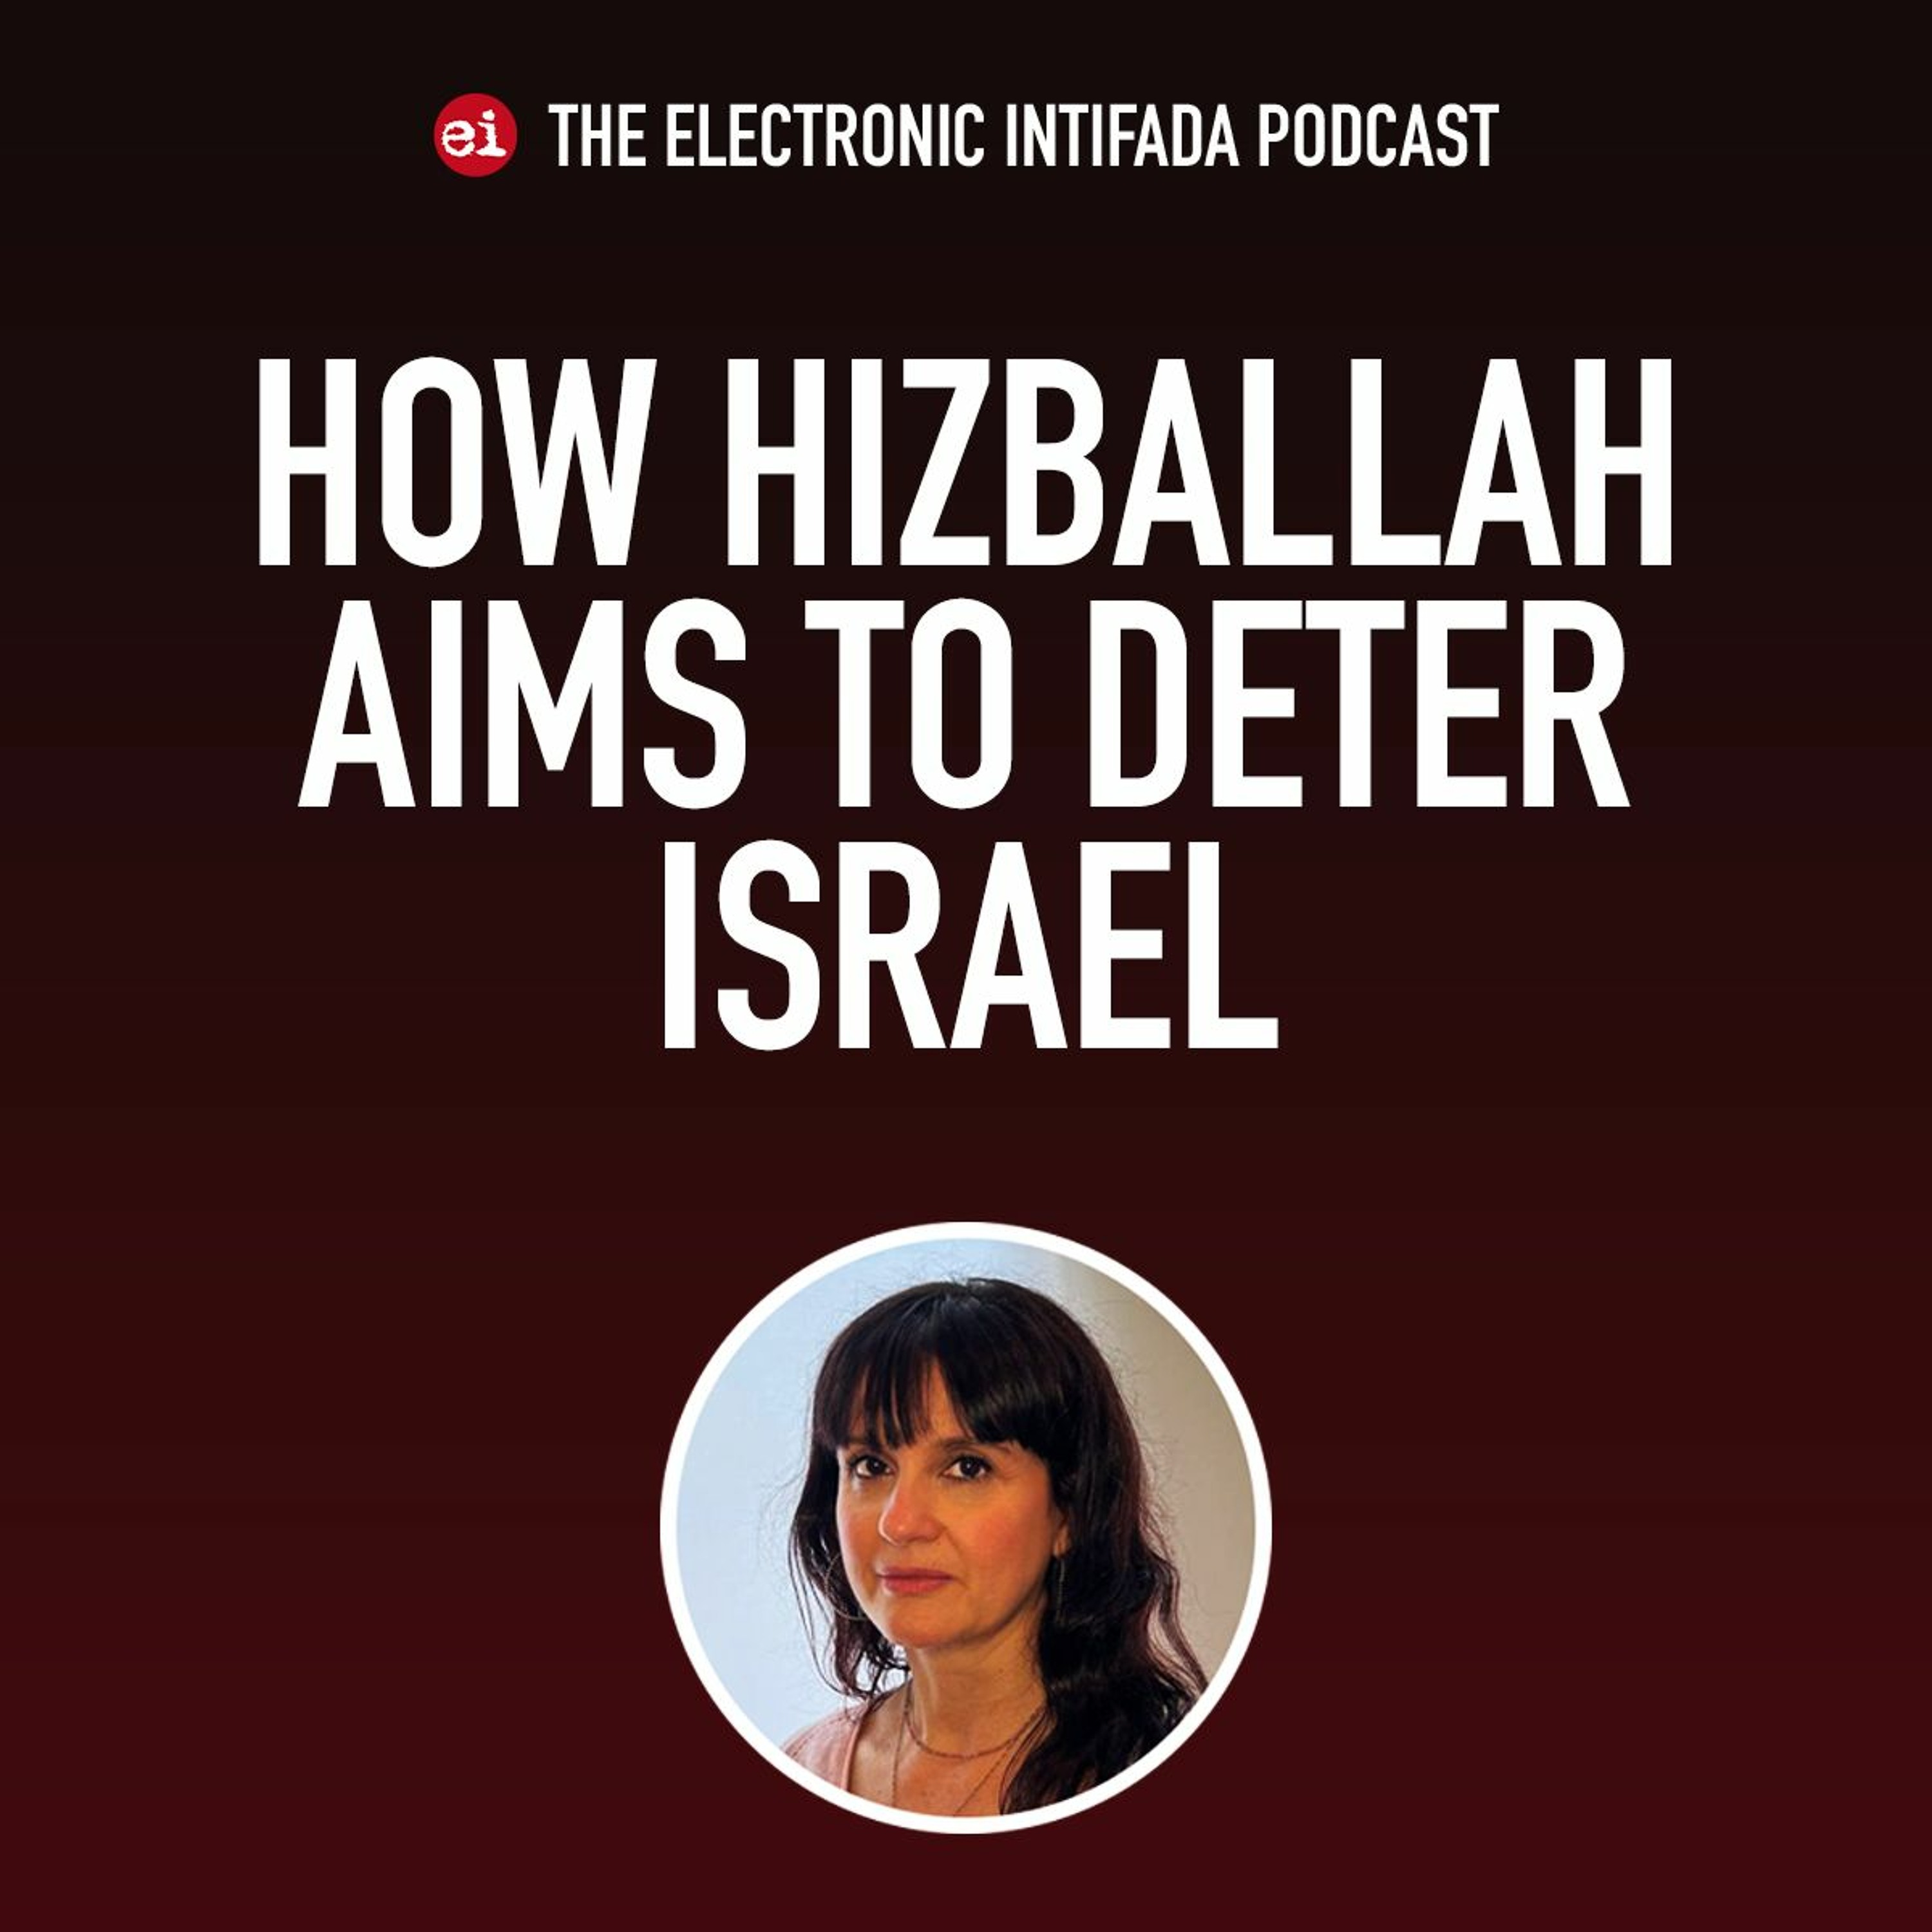 Podcast Ep 86: How Hizballah aims to deter Israel, with Amal Saad